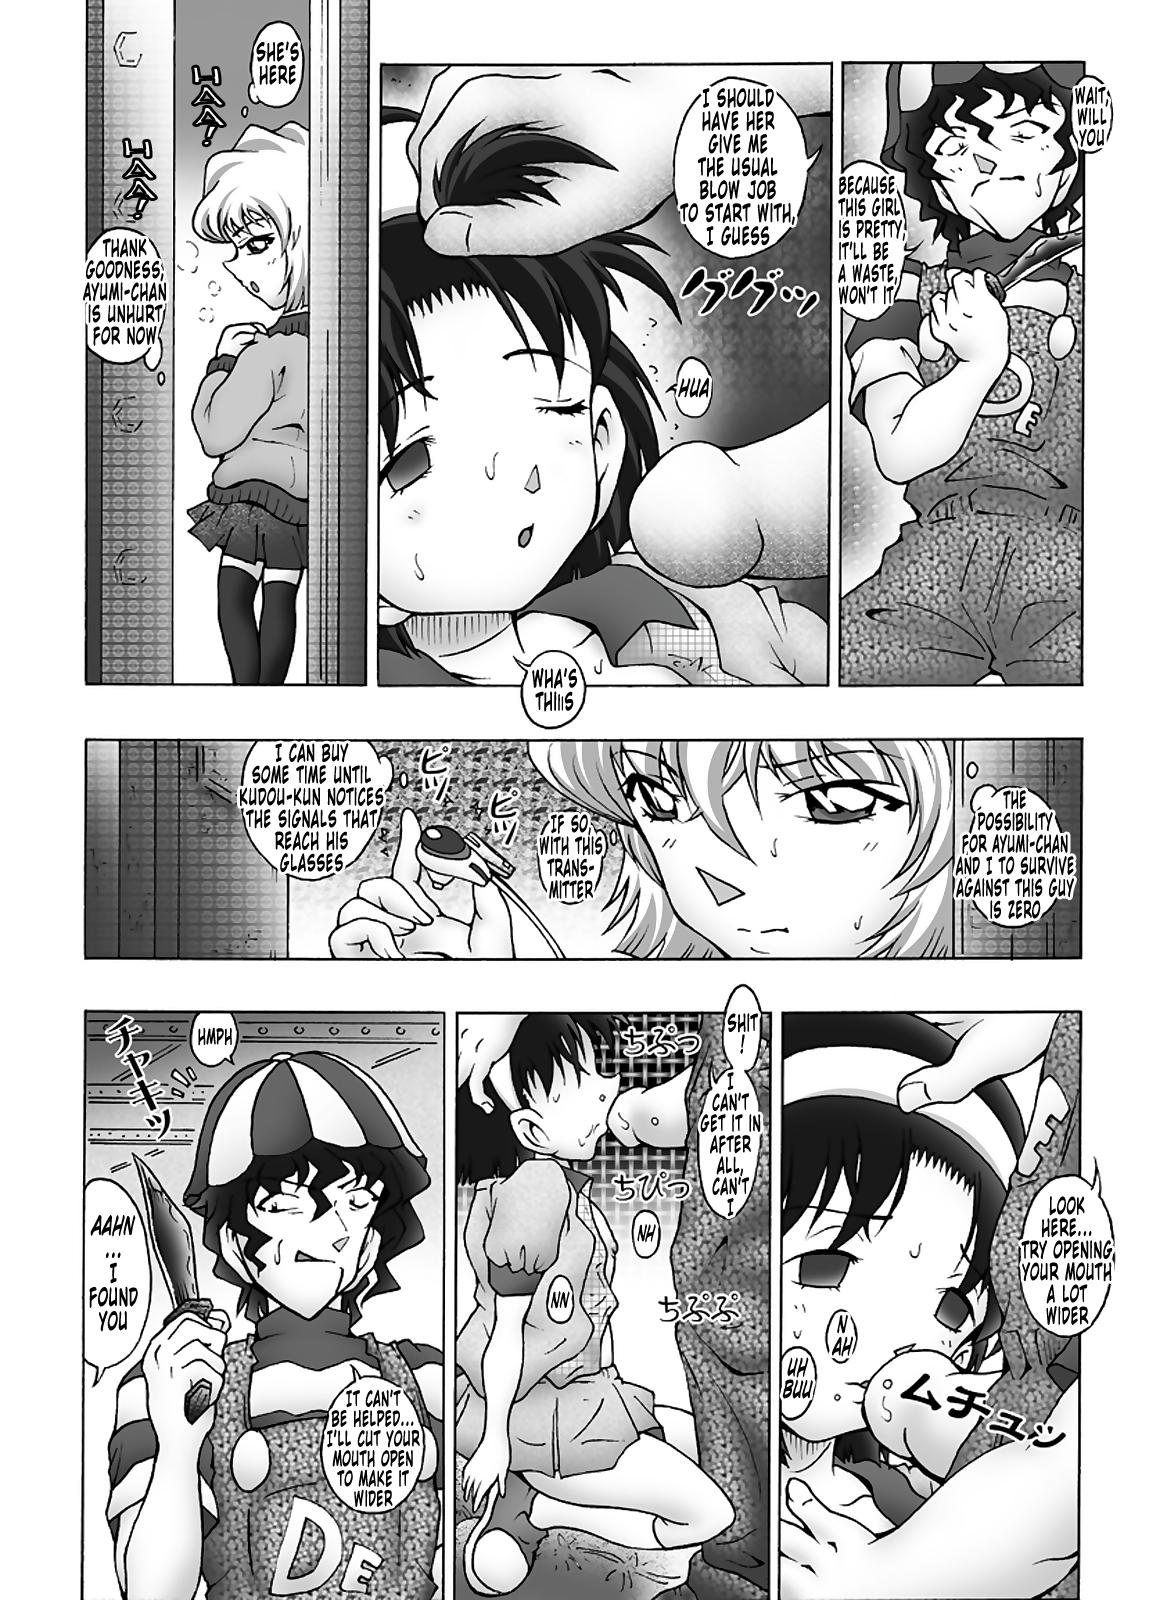 Pounded Bumbling Detective Conan - File 11: The Mystery Of Jack The Ripper's True Identity - Detective conan Swallow - Page 7